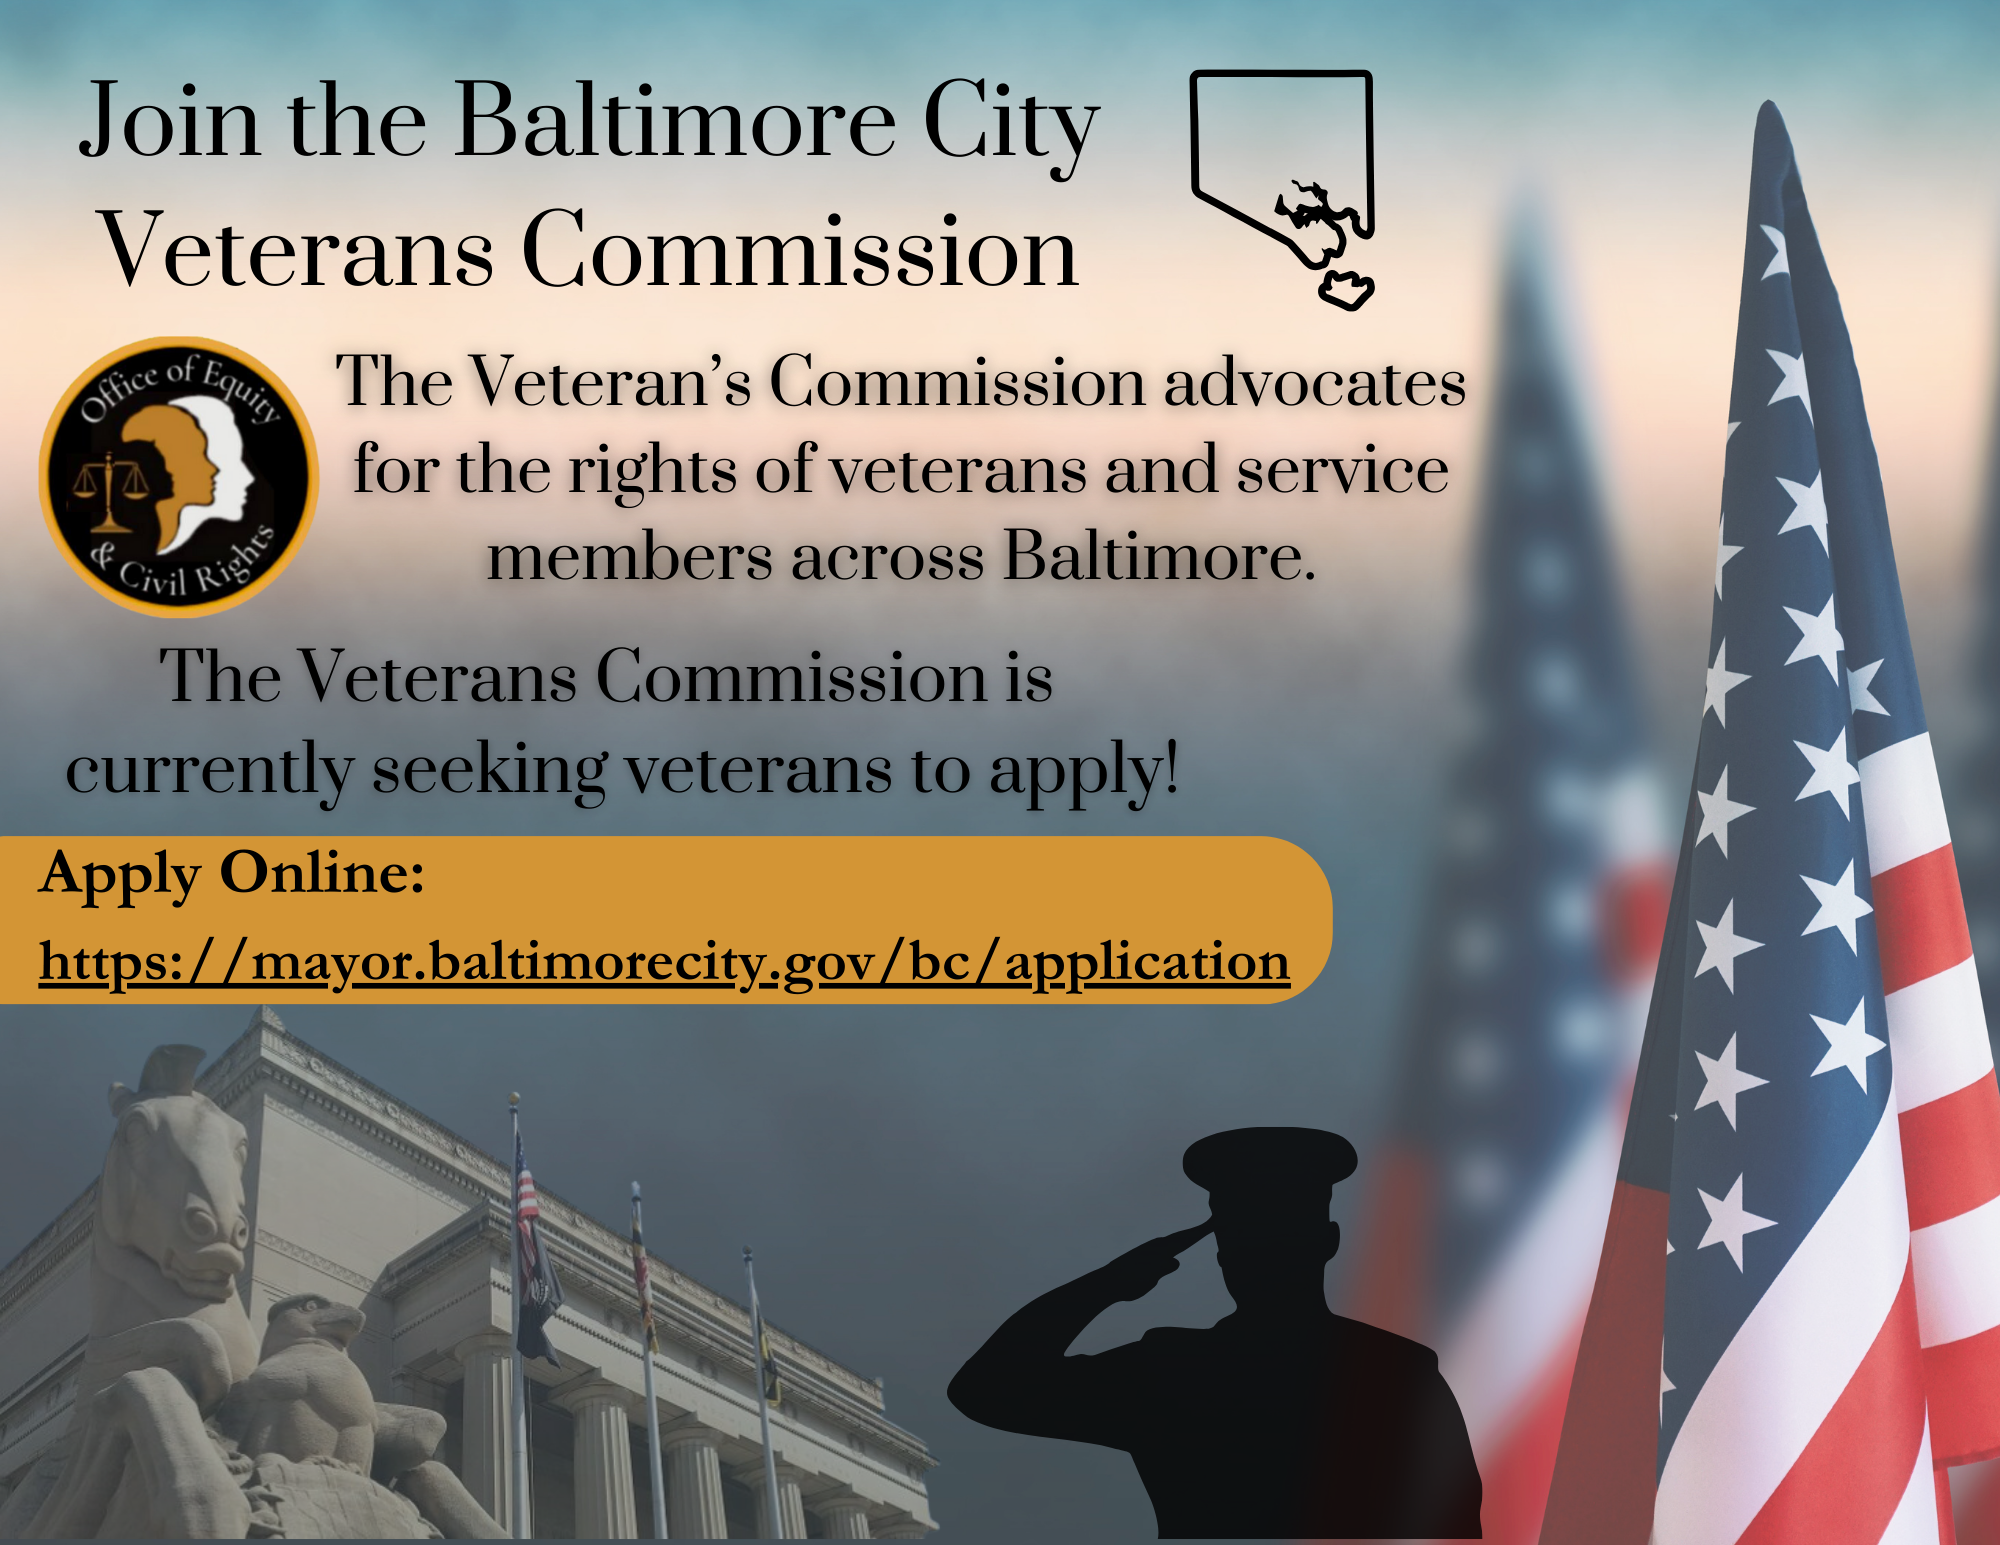 Join the Baltimore City Veterans Commission. The Veterans Commission advocates for the rights of veterans and service members across Baltimore. The Veterans Commission is currently seeking veterans to apply!